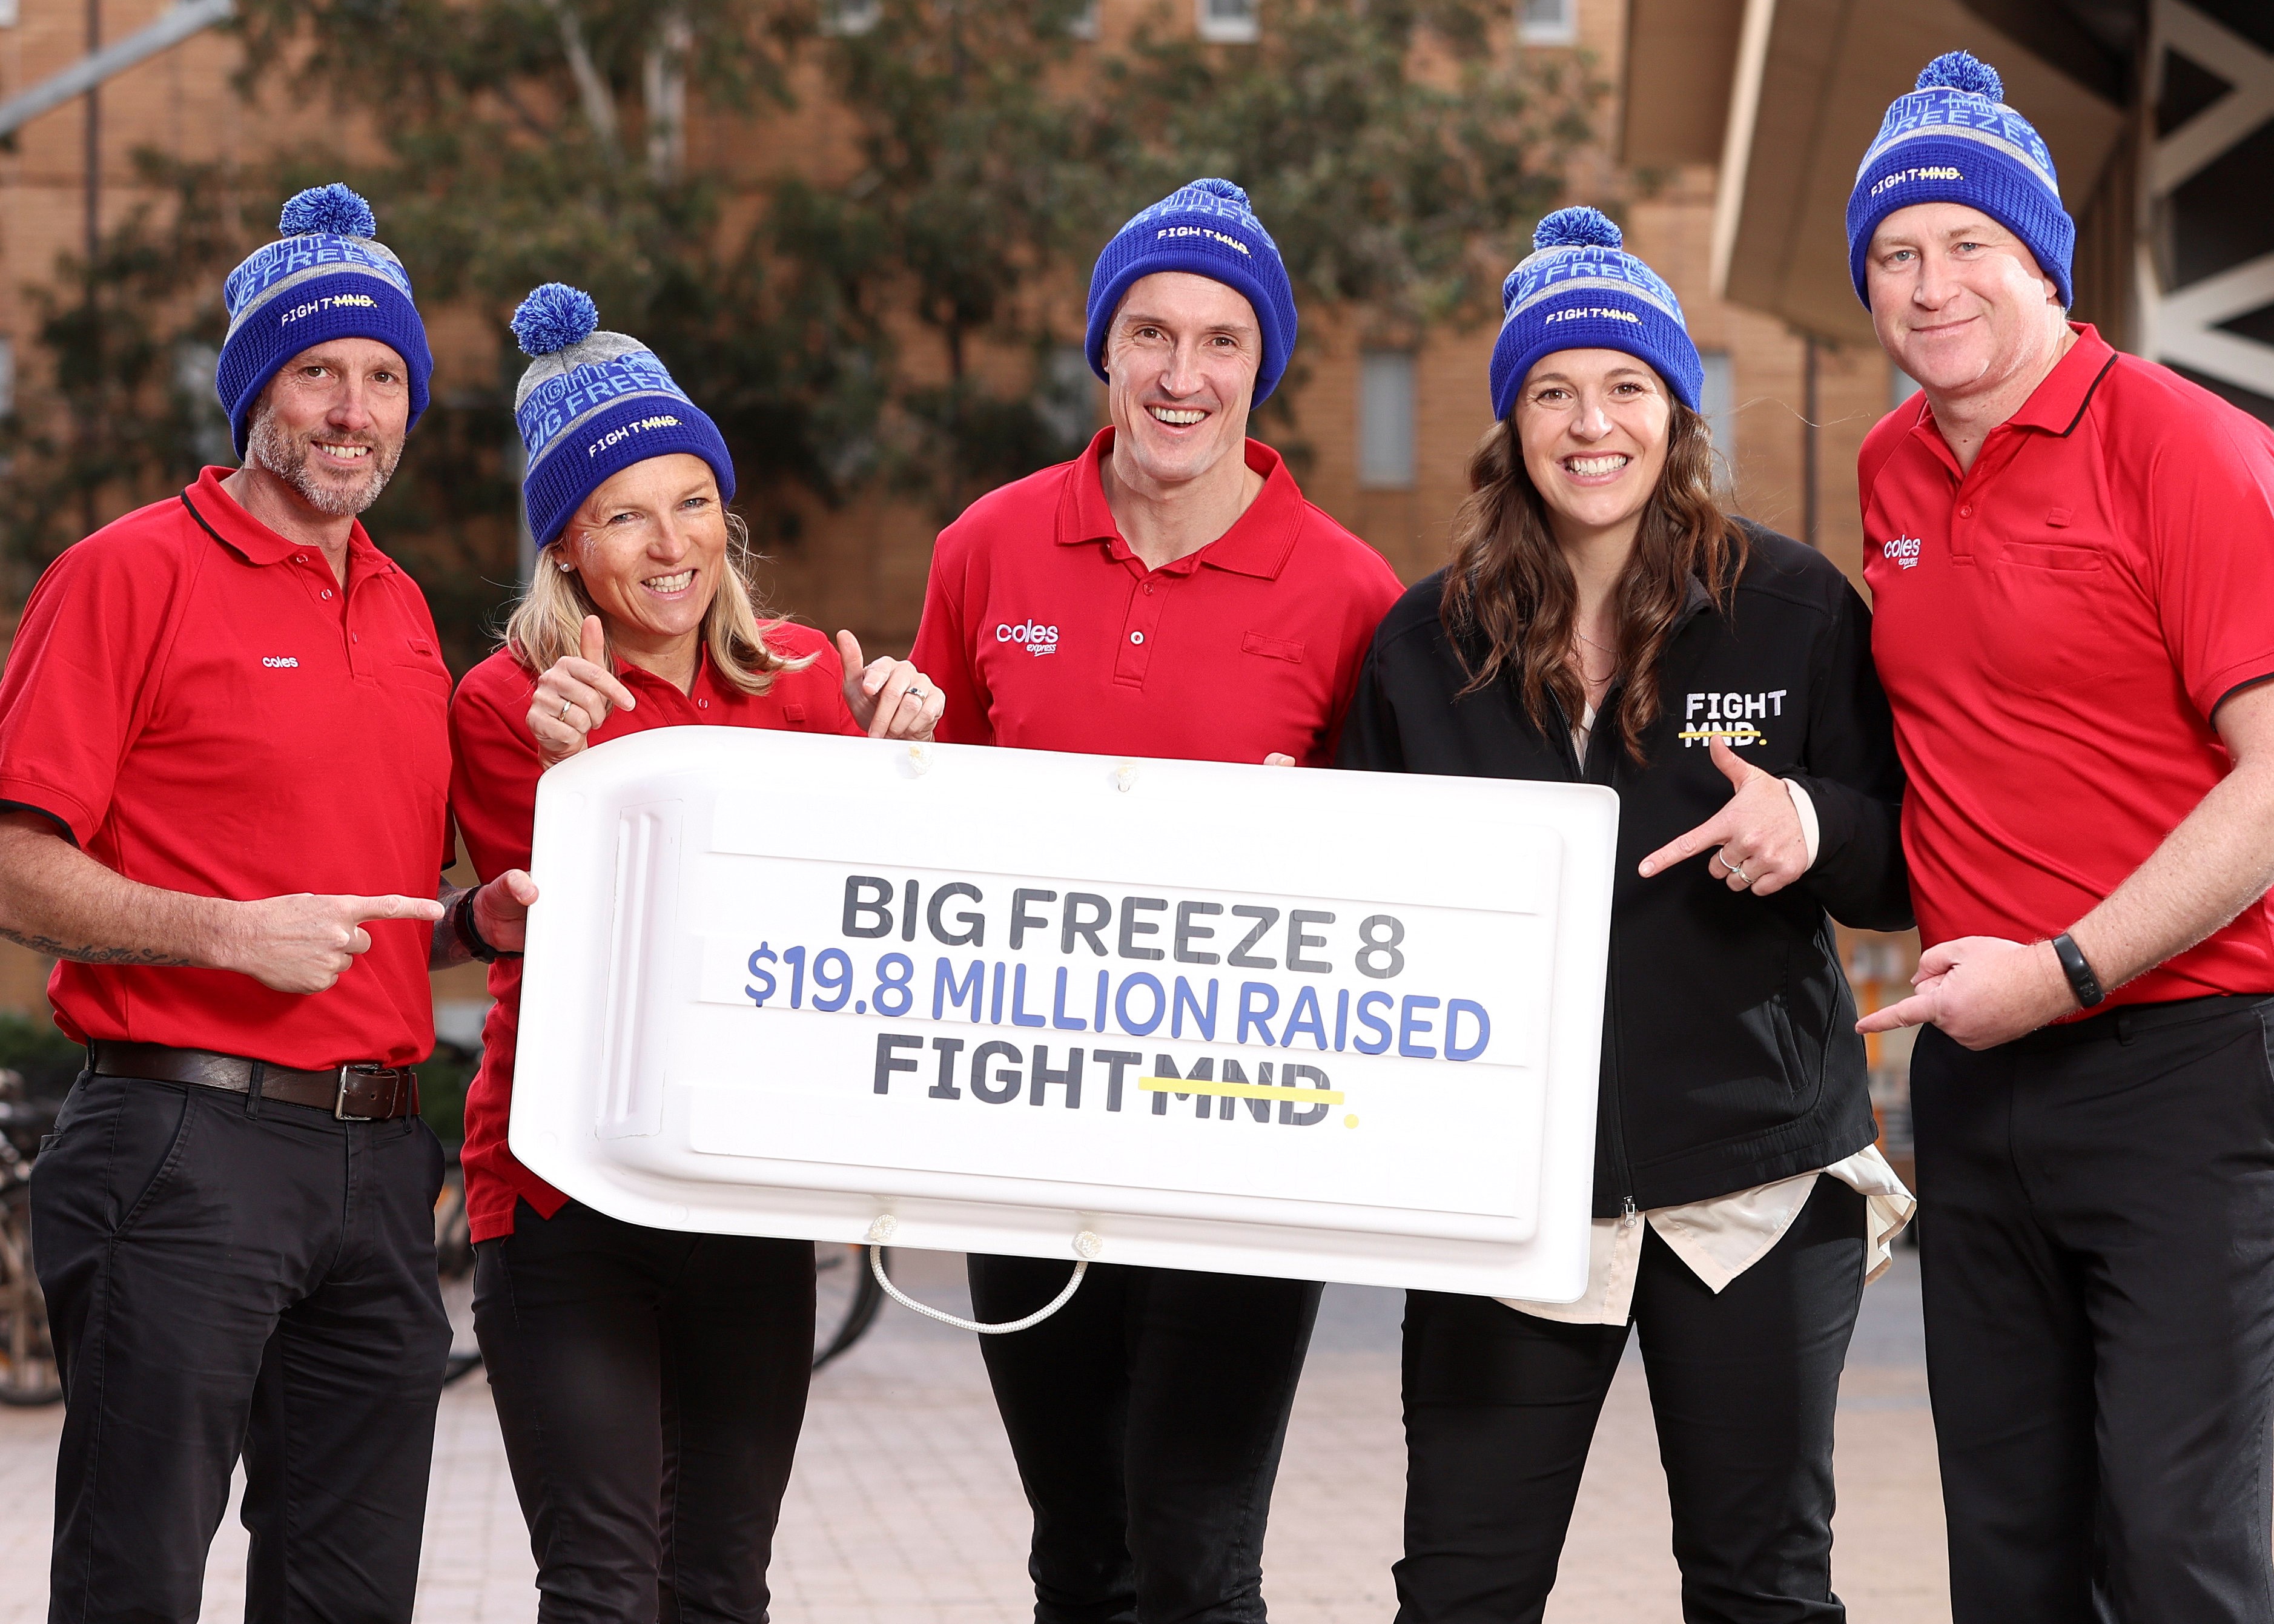 L-R: Coles National Operations Manager MDS Kane Yates, Head of Community and Stakeholder Engagement Julia Balderstone, Executive General Manager Express Michael Courtney, FightMND campaign Director Bec Daniher and Coles Express Category Manager Daniel Snell